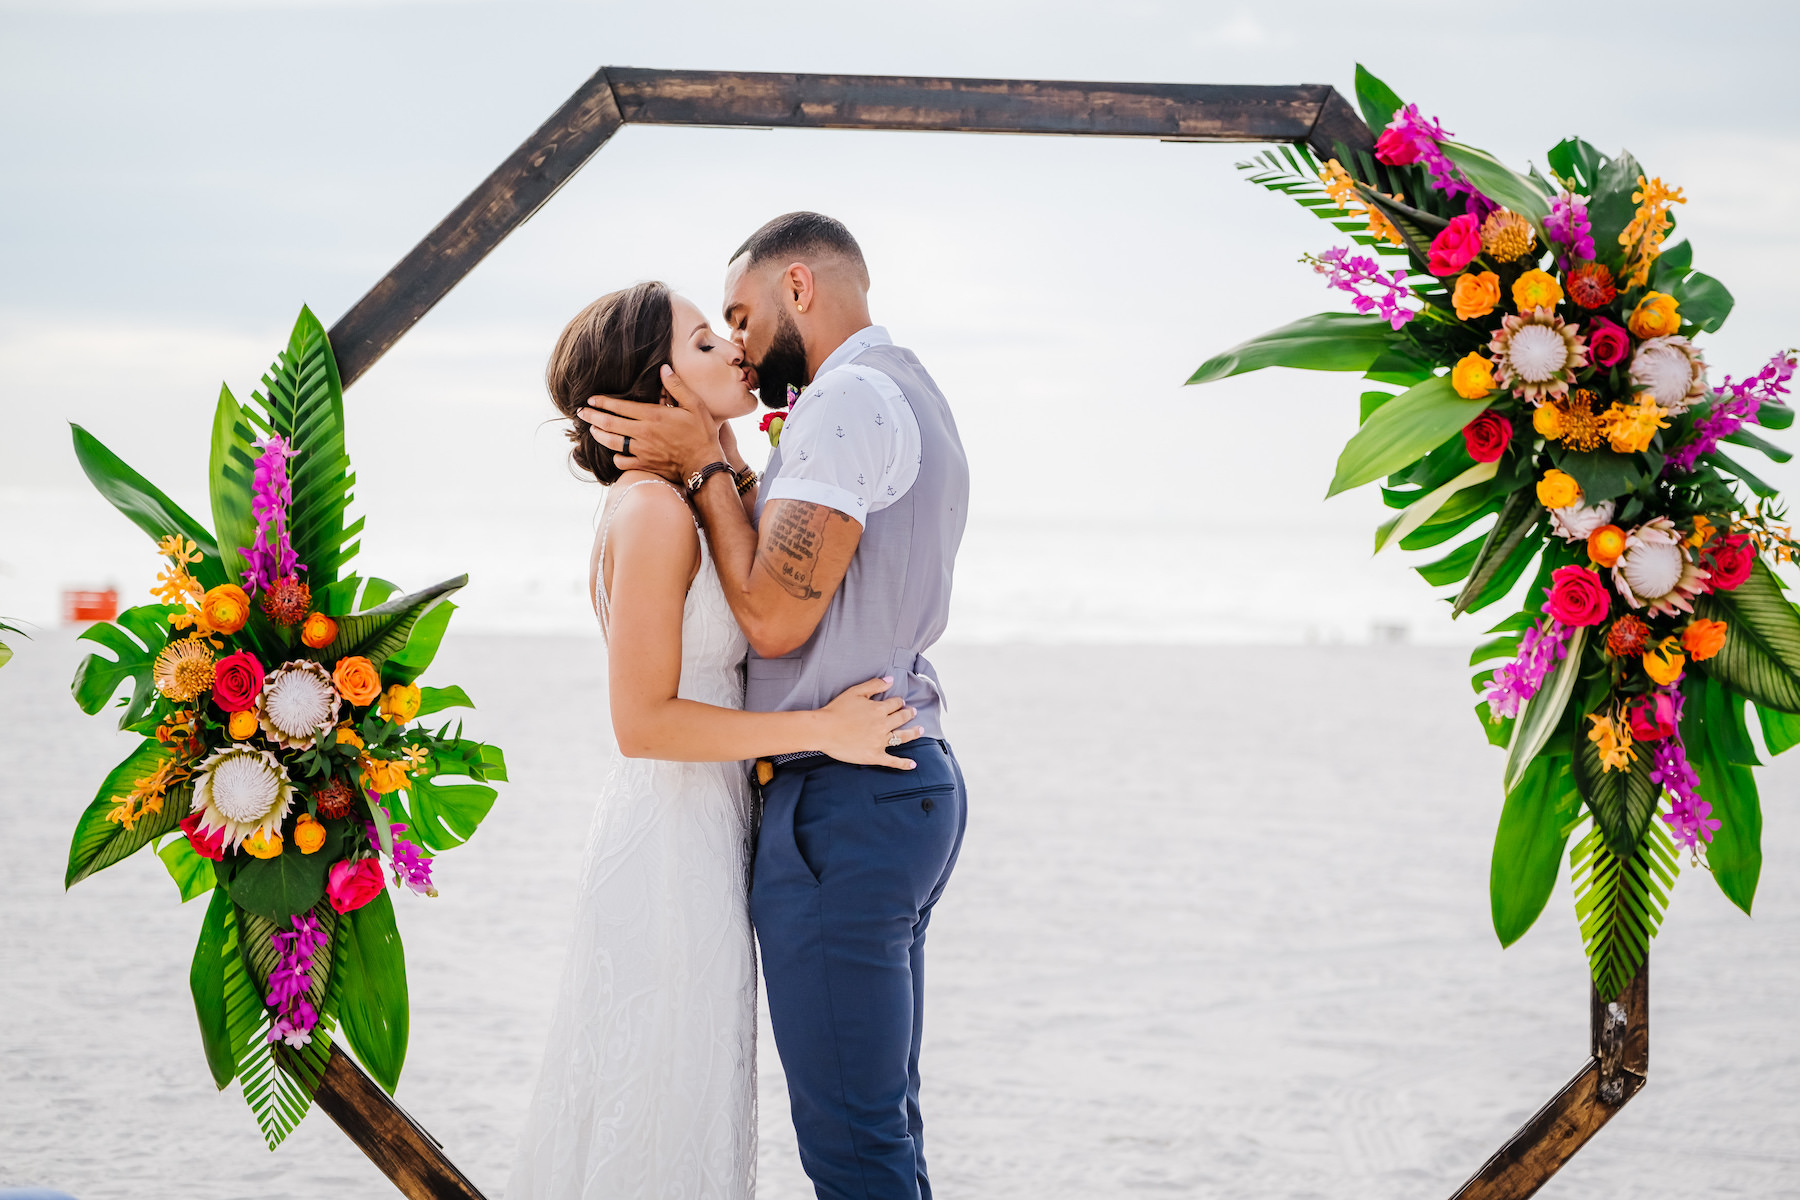 Clearwater Beach Intimate Kissing Bride and Groom Portrait, Geometric Octagonal Wooden Arch with Tropical King Proteas, Orange, Pink and Red Roses, Yellow and Purple Accents, Palm Fronds and Monstera Leaves Floral Arramngements, Beachfront and Waterfront Wedding